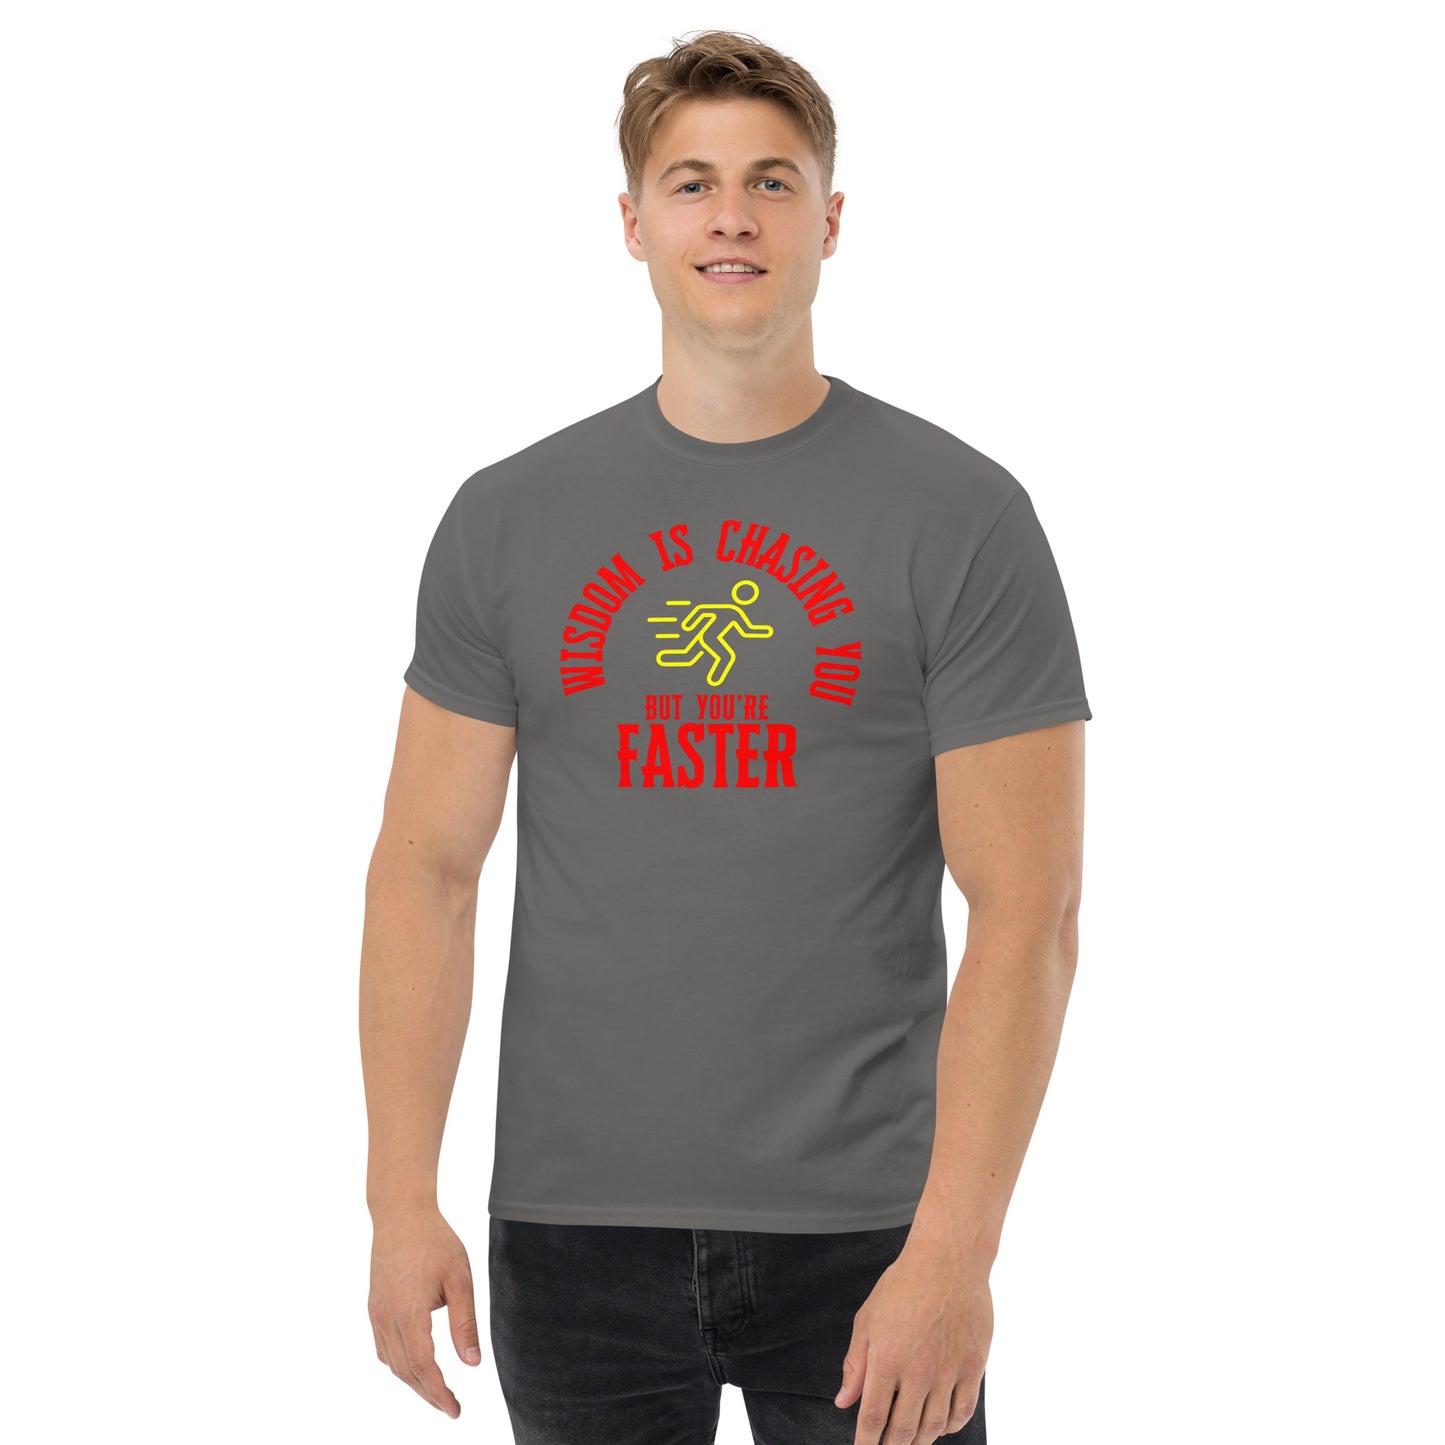 WISDOM IS CHASING YOU BUT YOU'RE FASTER Men's classic tee